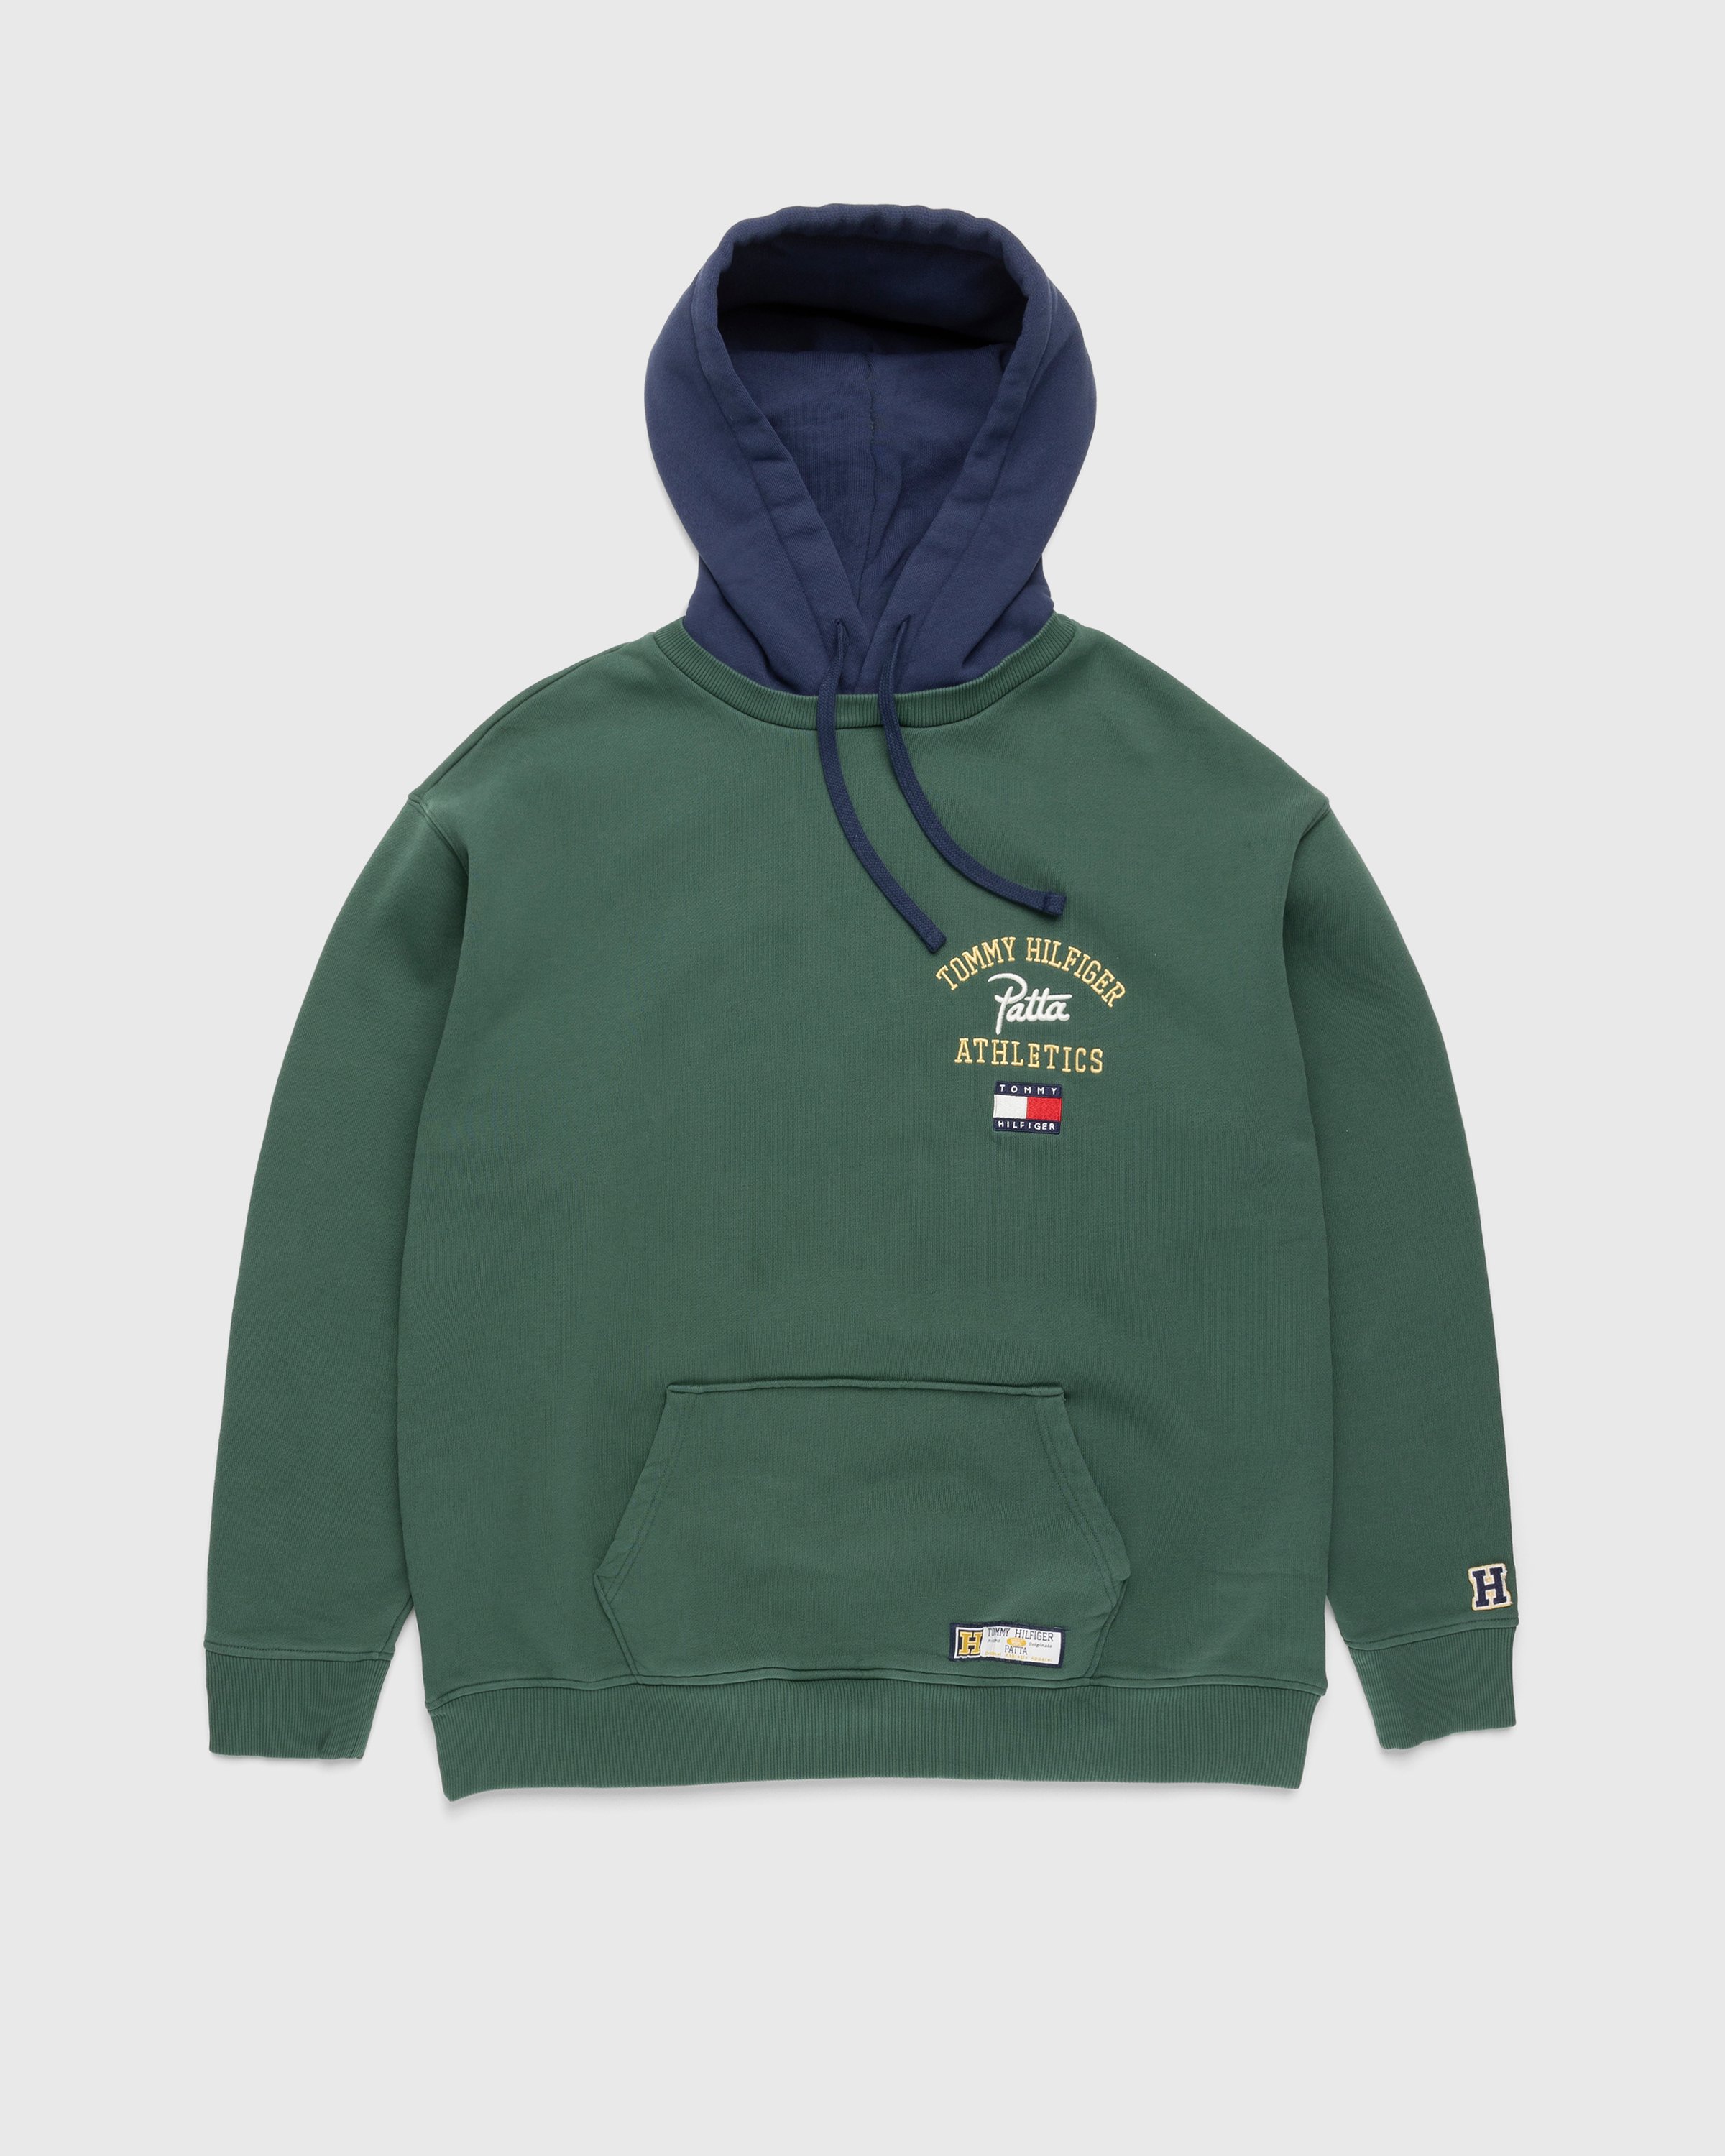 Patta x Tommy Hilfiger - Hoodie Midnight Green - Clothing - Green - Image 1